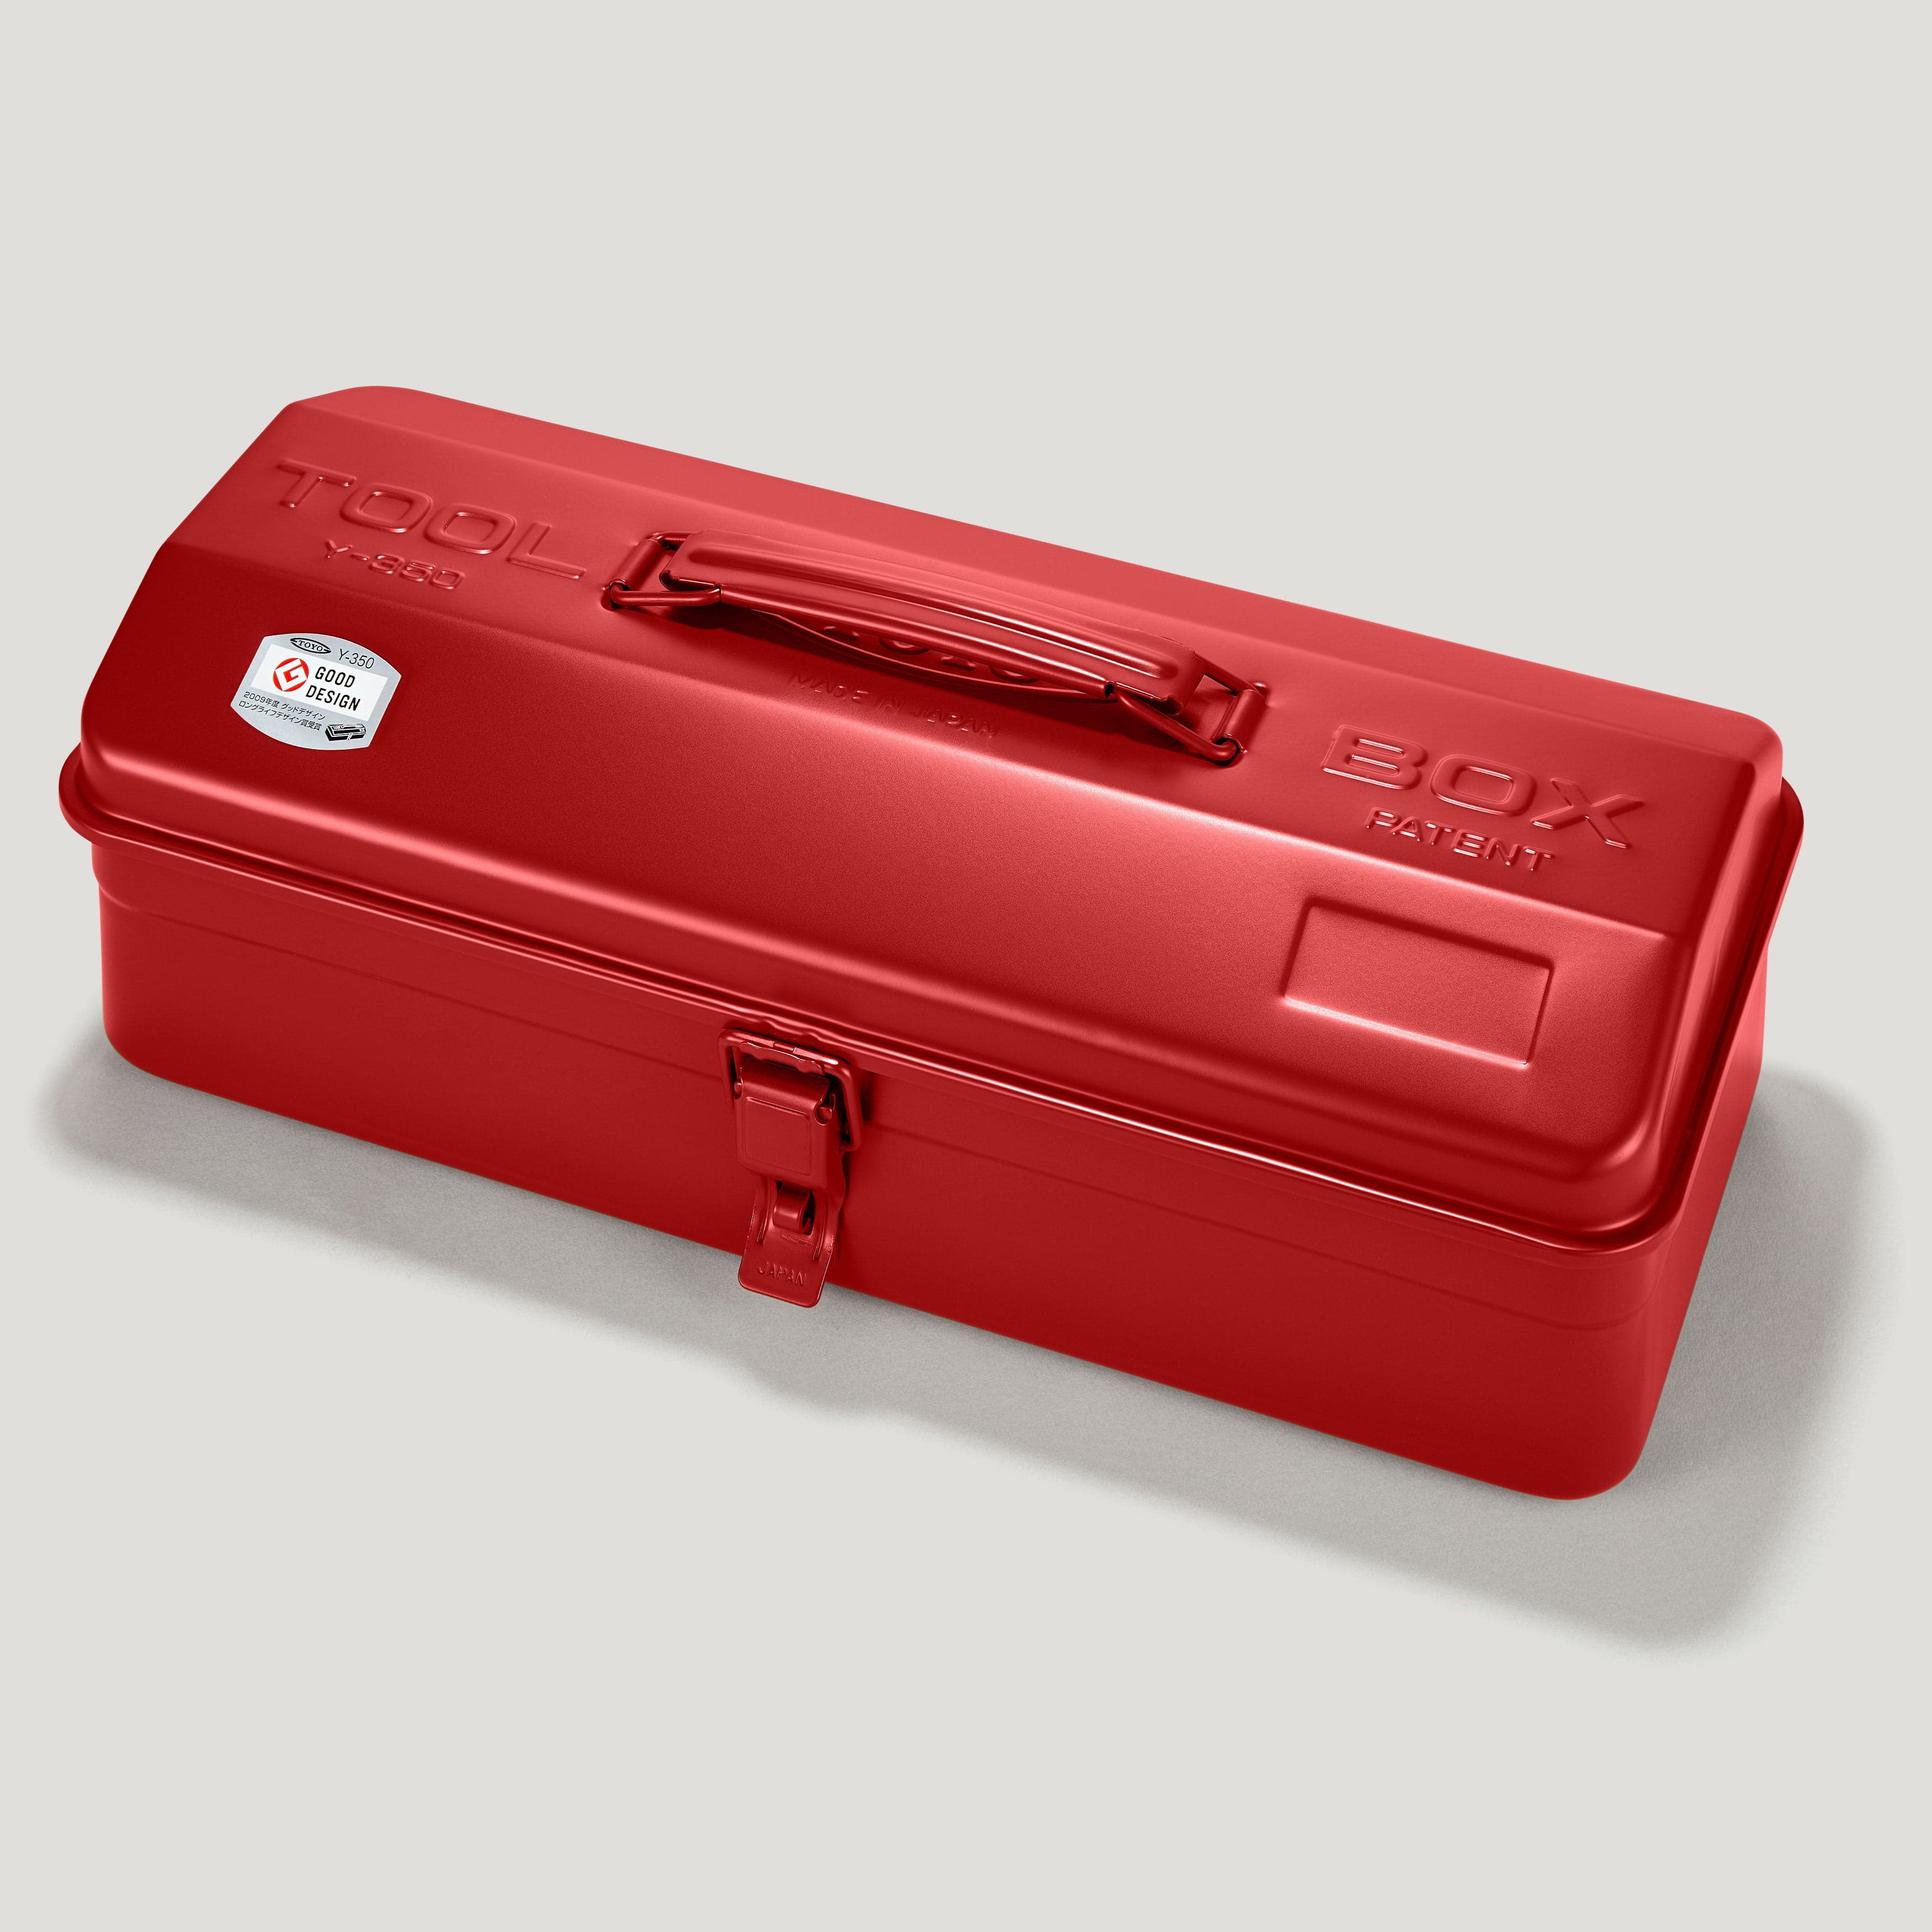 Plank Hardware Accessories TOYO Steel Tool Box - Red